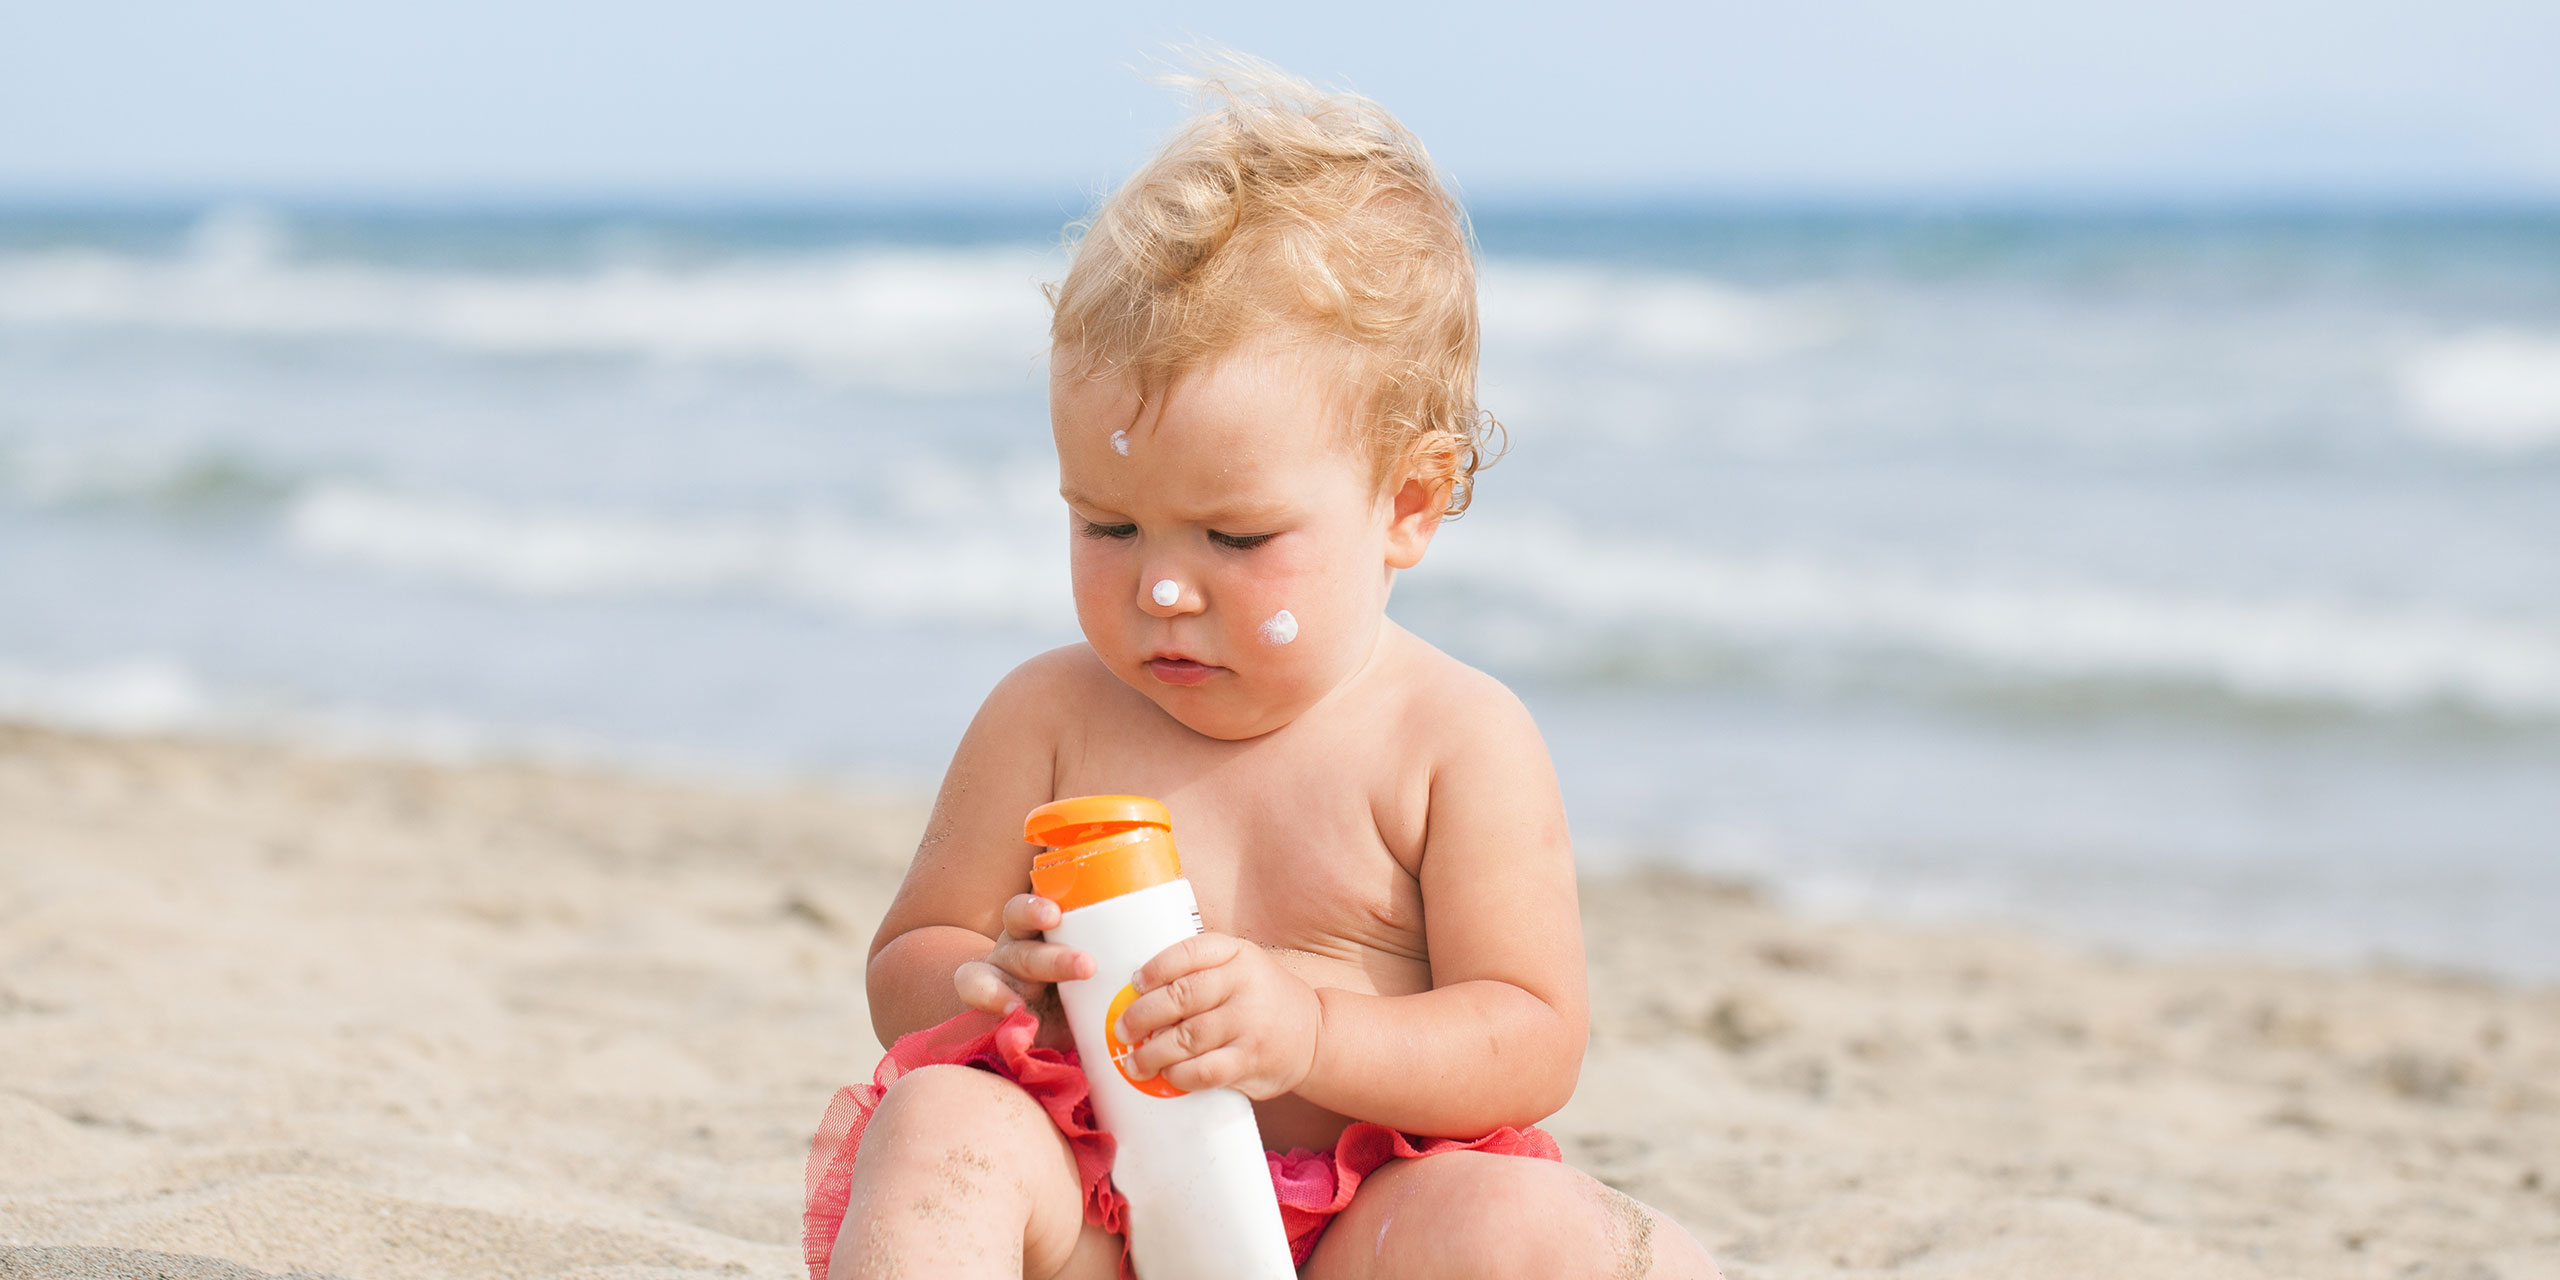 How to buy the best sunscreen for babies